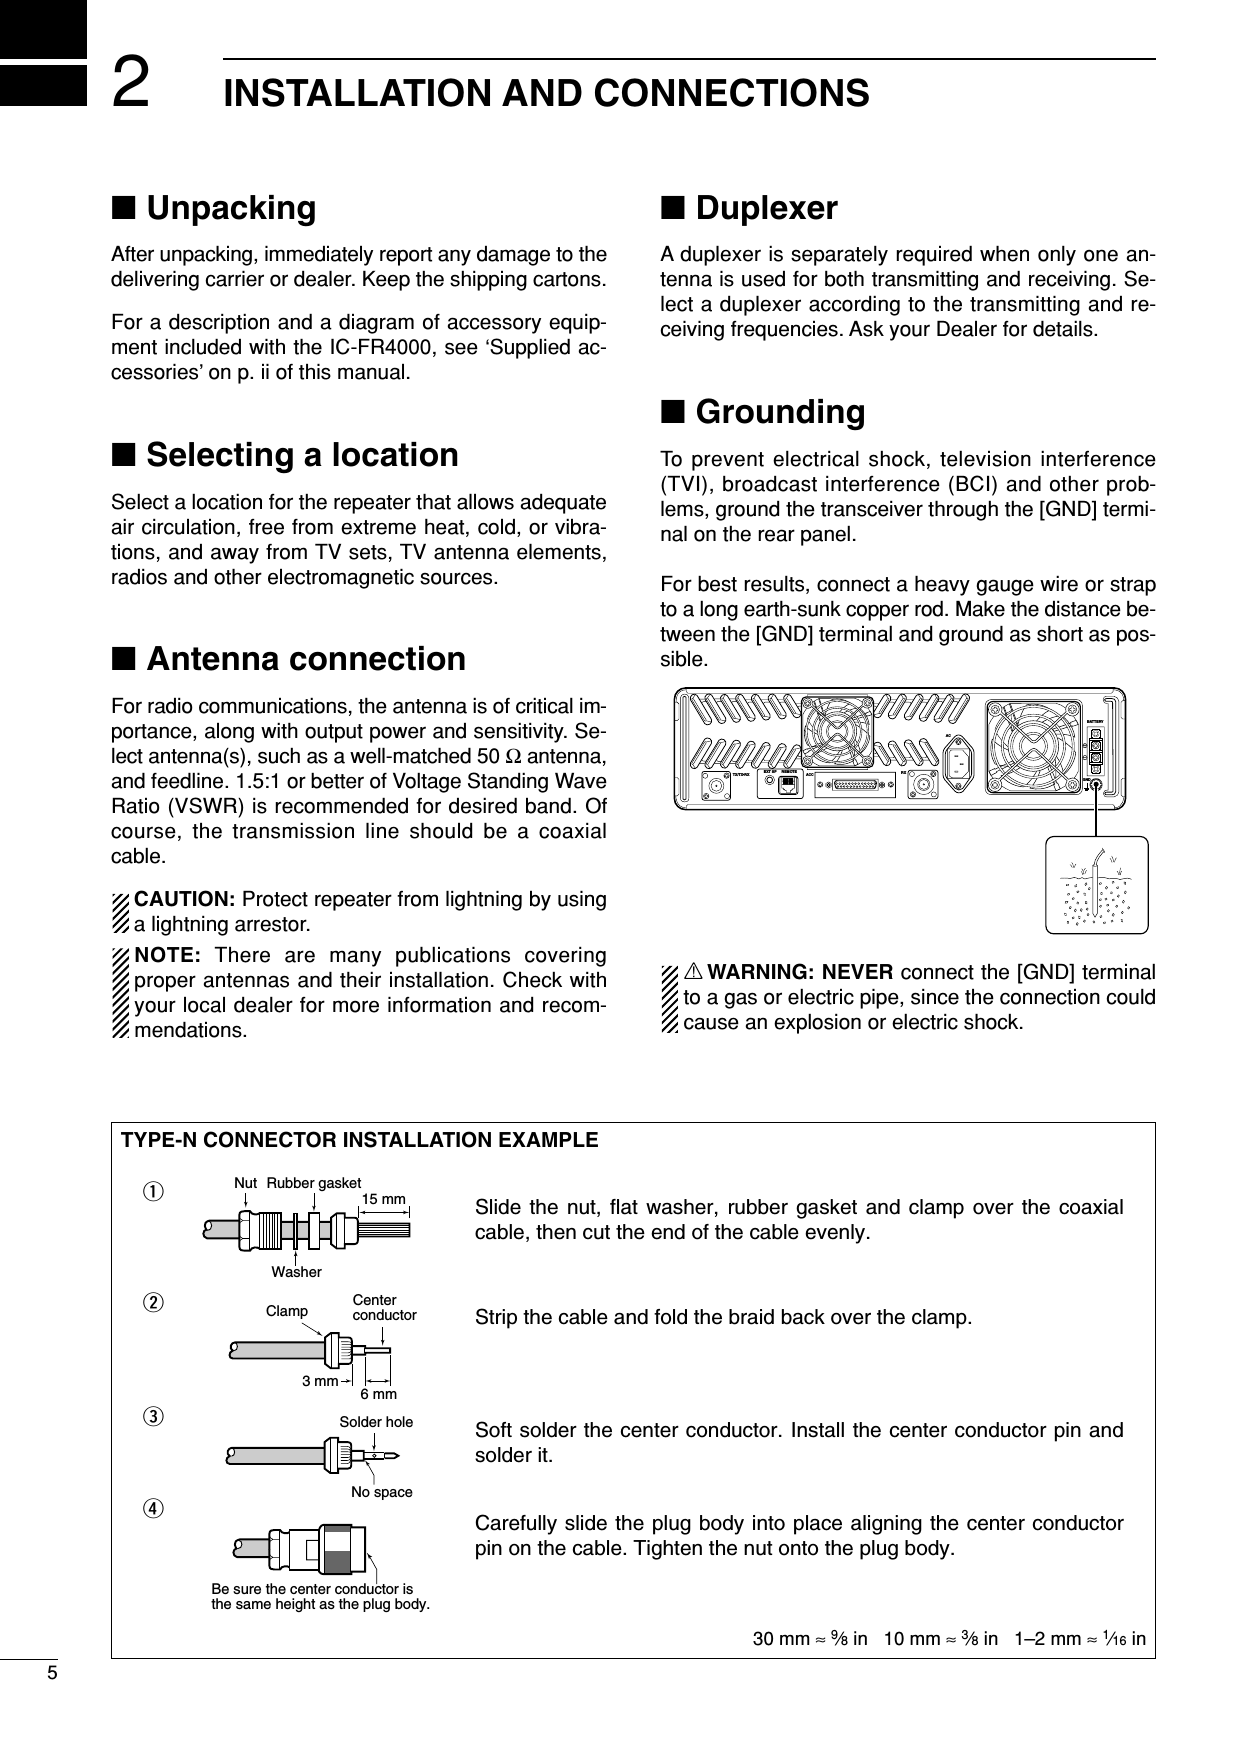 25INSTALLATION AND CONNECTIONS■UnpackingAfter unpacking, immediately report any damage to thedelivering carrier or dealer. Keep the shipping cartons.For a description and a diagram of accessory equip-ment included with the IC-FR4000, see ‘Supplied ac-cessories’ on p. ii of this manual.■Selecting a locationSelect a location for the repeater that allows adequateair circulation, free from extreme heat, cold, or vibra-tions, and away from TV sets, TV antenna elements,radios and other electromagnetic sources.■Antenna connectionFor radio communications, the antenna is of critical im-portance, along with output power and sensitivity. Se-lect antenna(s), such as a well-matched 50 Ωantenna,and feedline. 1.5:1 or better of Voltage Standing WaveRatio (VSWR) is recommended for desired band. Ofcourse, the transmission line should be a coaxialcable.CAUTION: Protect repeater from lightning by usinga lightning arrestor.NOTE: There are many publications coveringproper antennas and their installation. Check withyour local dealer for more information and recom-mendations.■DuplexerA duplexer is separately required when only one an-tenna is used for both transmitting and receiving. Se-lect a duplexer according to the transmitting and re-ceiving frequencies. Ask your Dealer for details.■GroundingTo prevent electrical shock, television interference(TVI), broadcast interference (BCI) and other prob-lems, ground the transceiver through the [GND] termi-nal on the rear panel.For best results, connect a heavy gauge wire or strapto a long earth-sunk copper rod. Make the distance be-tween the [GND] terminal and ground as short as pos-sible.RWARNING: NEVER connect the [GND] terminalto a gas or electric pipe, since the connection couldcause an explosion or electric shock.TX/TX•RXEXT SP REMOTEACC RXGNDACBATTERYTYPE-N CONNECTOR INSTALLATION EXAMPLE30 mm ≈9⁄8in   10 mm ≈3⁄8in   1–2 mm ≈1⁄16 inSlide the nut, flat washer, rubber gasket and clamp over the coaxial cable, then cut the end of the cable evenly.Strip the cable and fold the braid back over the clamp.Soft solder the center conductor. Install the center conductor pin and solder it.Carefully slide the plug body into place aligning the center conductor pin on the cable. Tighten the nut onto the plug body.qwer15 mm3 mm 6 mmNo spaceSolder holeBe sure the center conductor is the same height as the plug body.Clamp CenterconductorWasherNut Rubber gasket